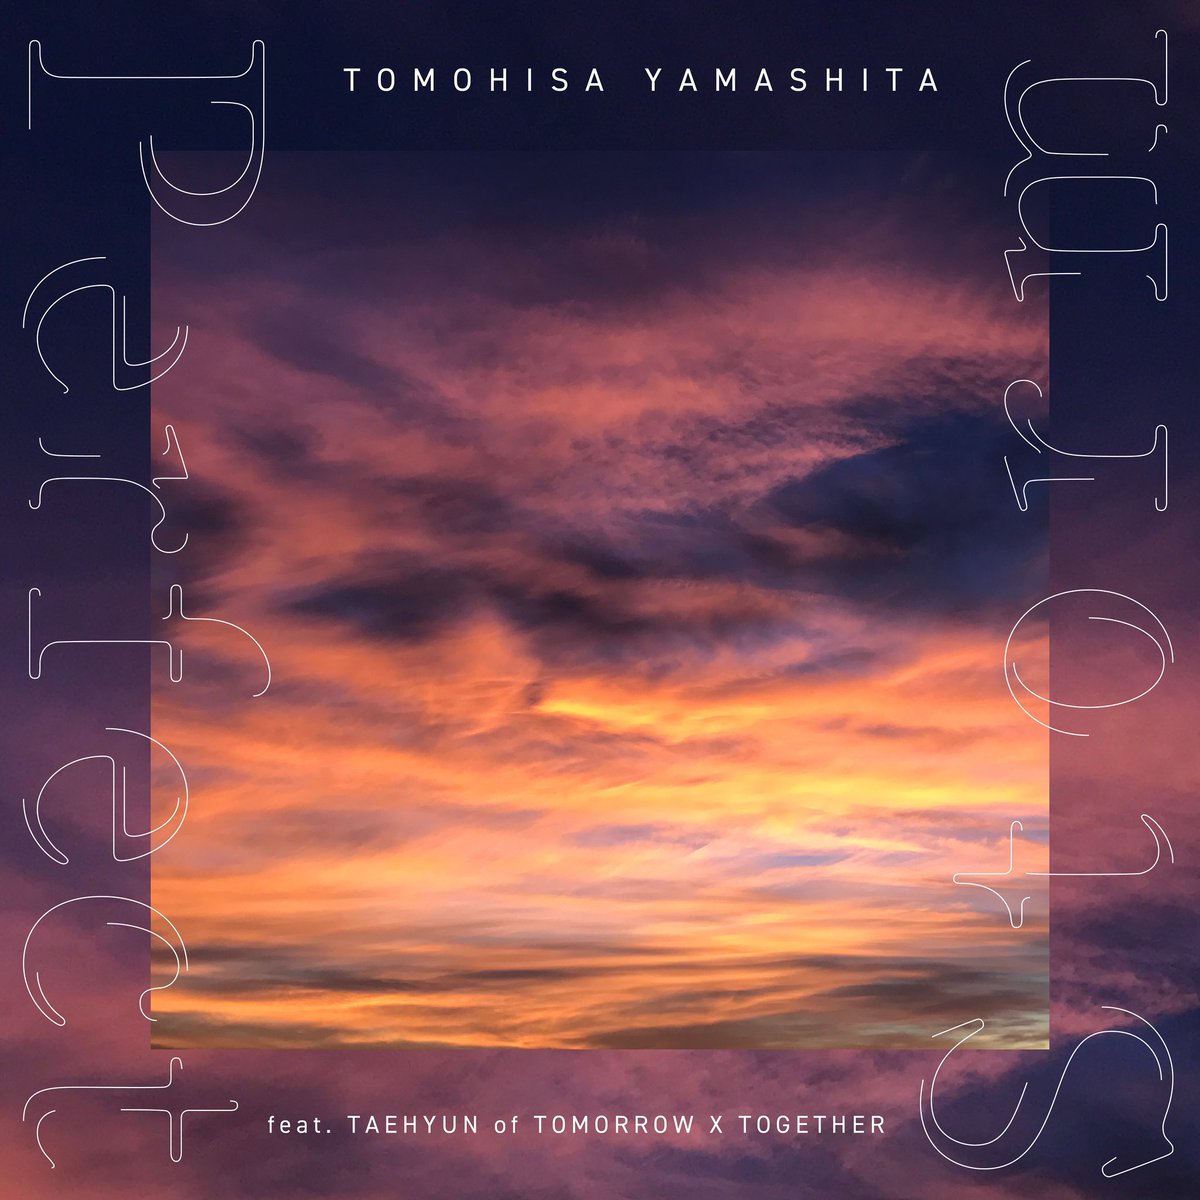 First of all we’re finally getting Perfect Storm in June 5th!!!

Tomohisa Yamashita feat our amazing Taehyun!!

The song is part of the ost of Tomohisa’s show Blue Moment

Don’t forget to tune in and listen to the song!! ⛈️⛈️